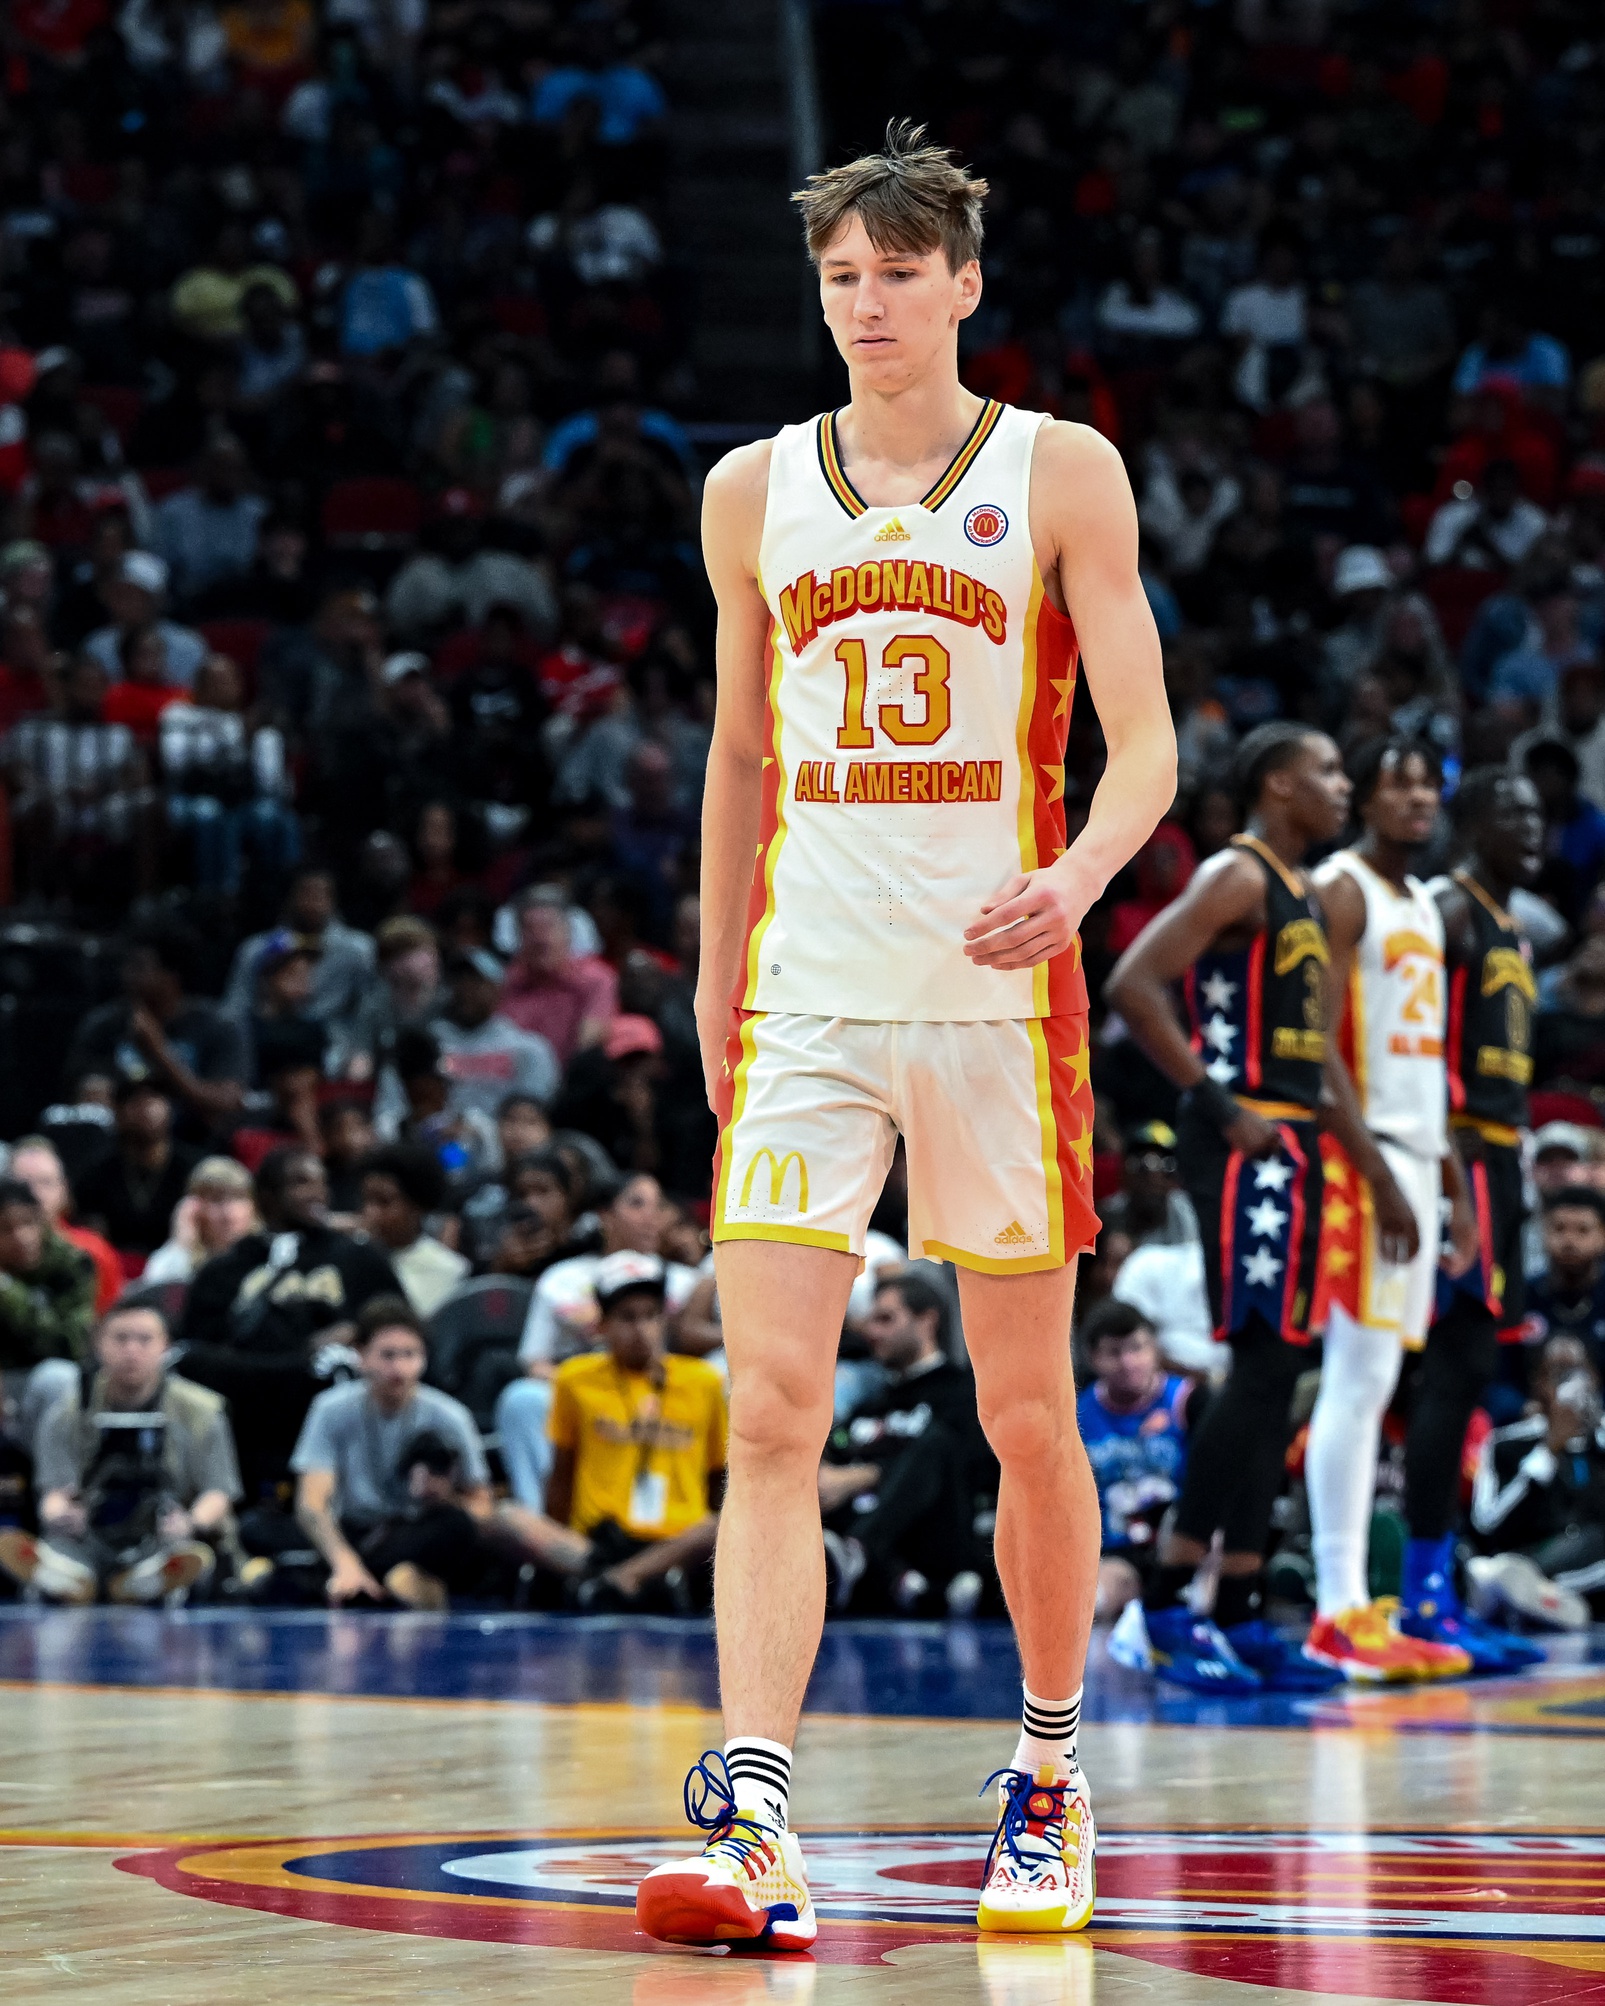 Mar 28, 2023; Houston, TX, USA; McDonald's All American East guard Matas Buzelis (13) stands on the court during the first half against the McDonald's All American West at Toyota Center. Mandatory Credit: Maria Lysaker-USA TODAY Sports